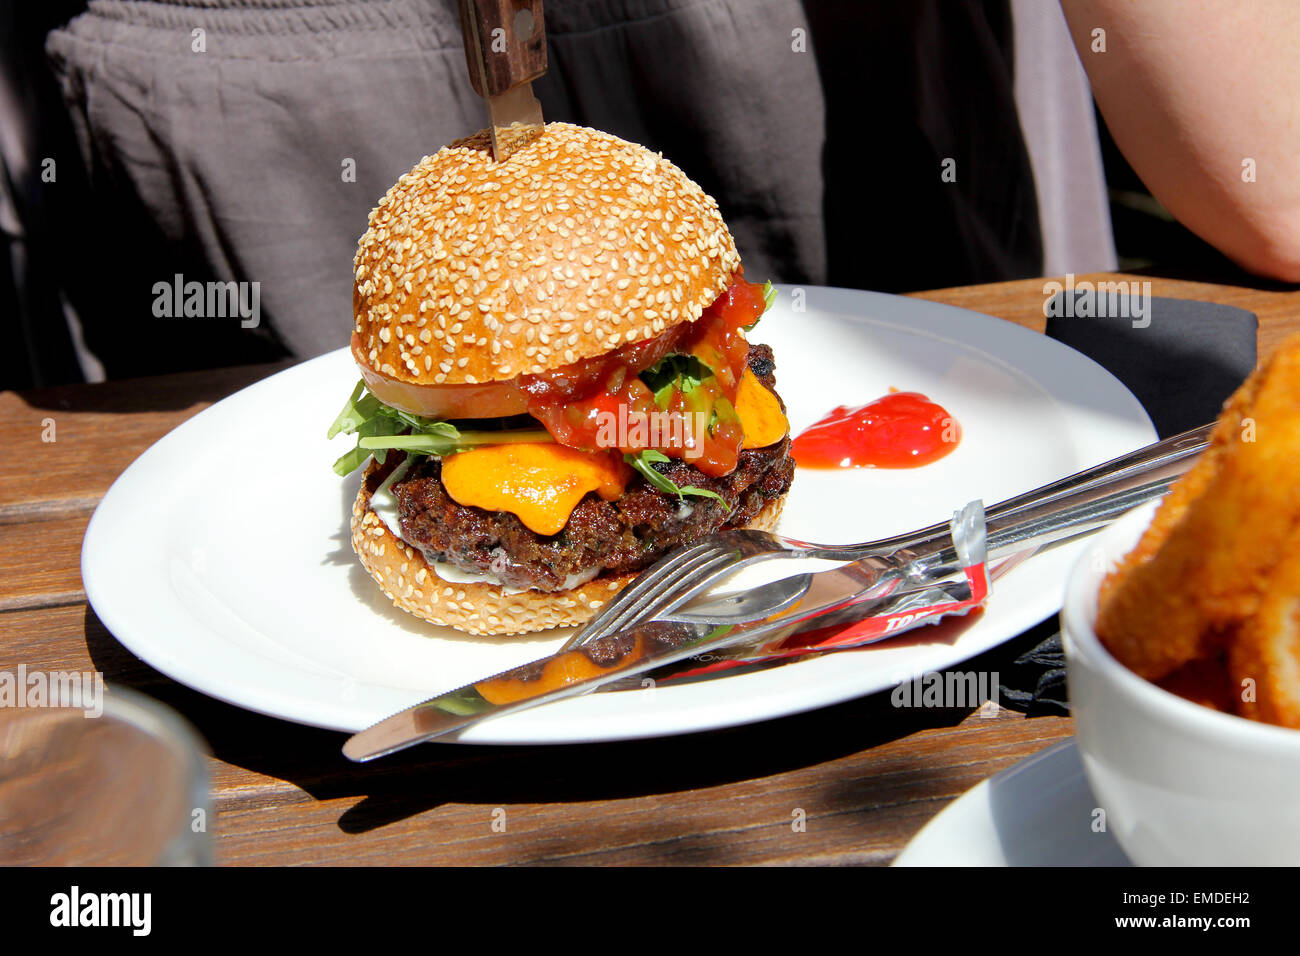 Cheese burger on plate Stock Photo